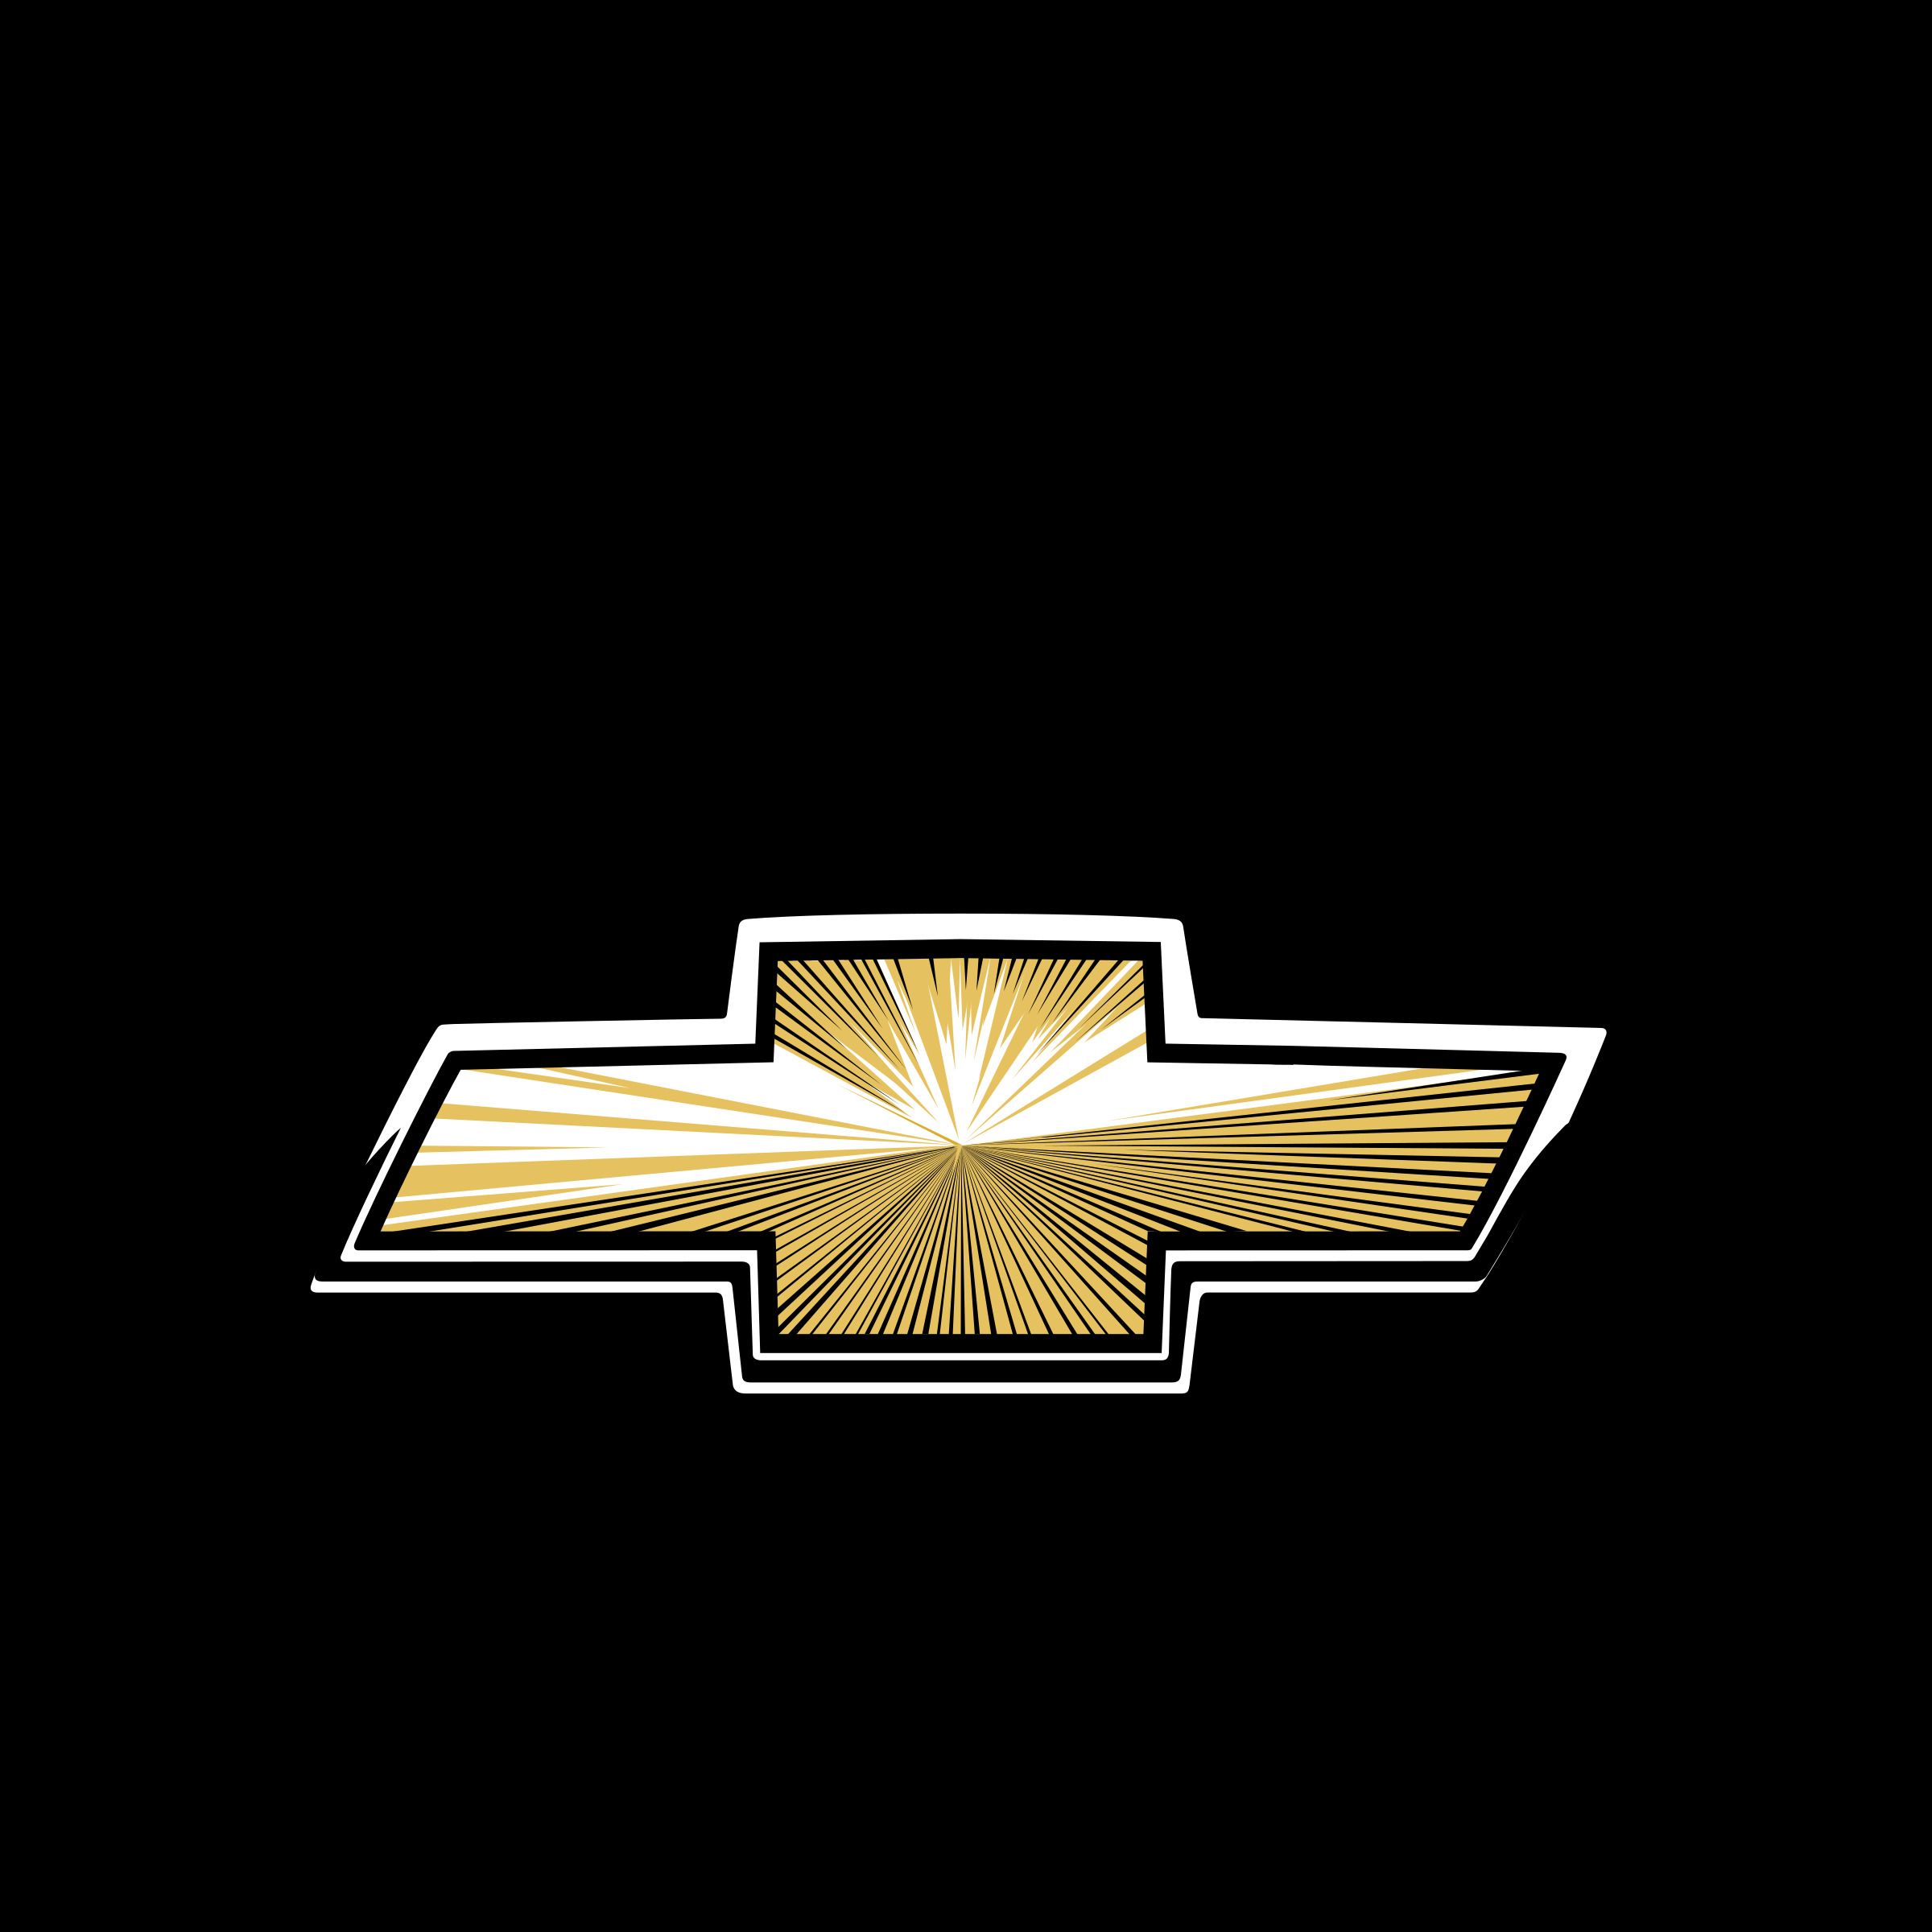 Chevy Truck Logo - Chevy Truck Logo PNG Transparent & SVG Vector